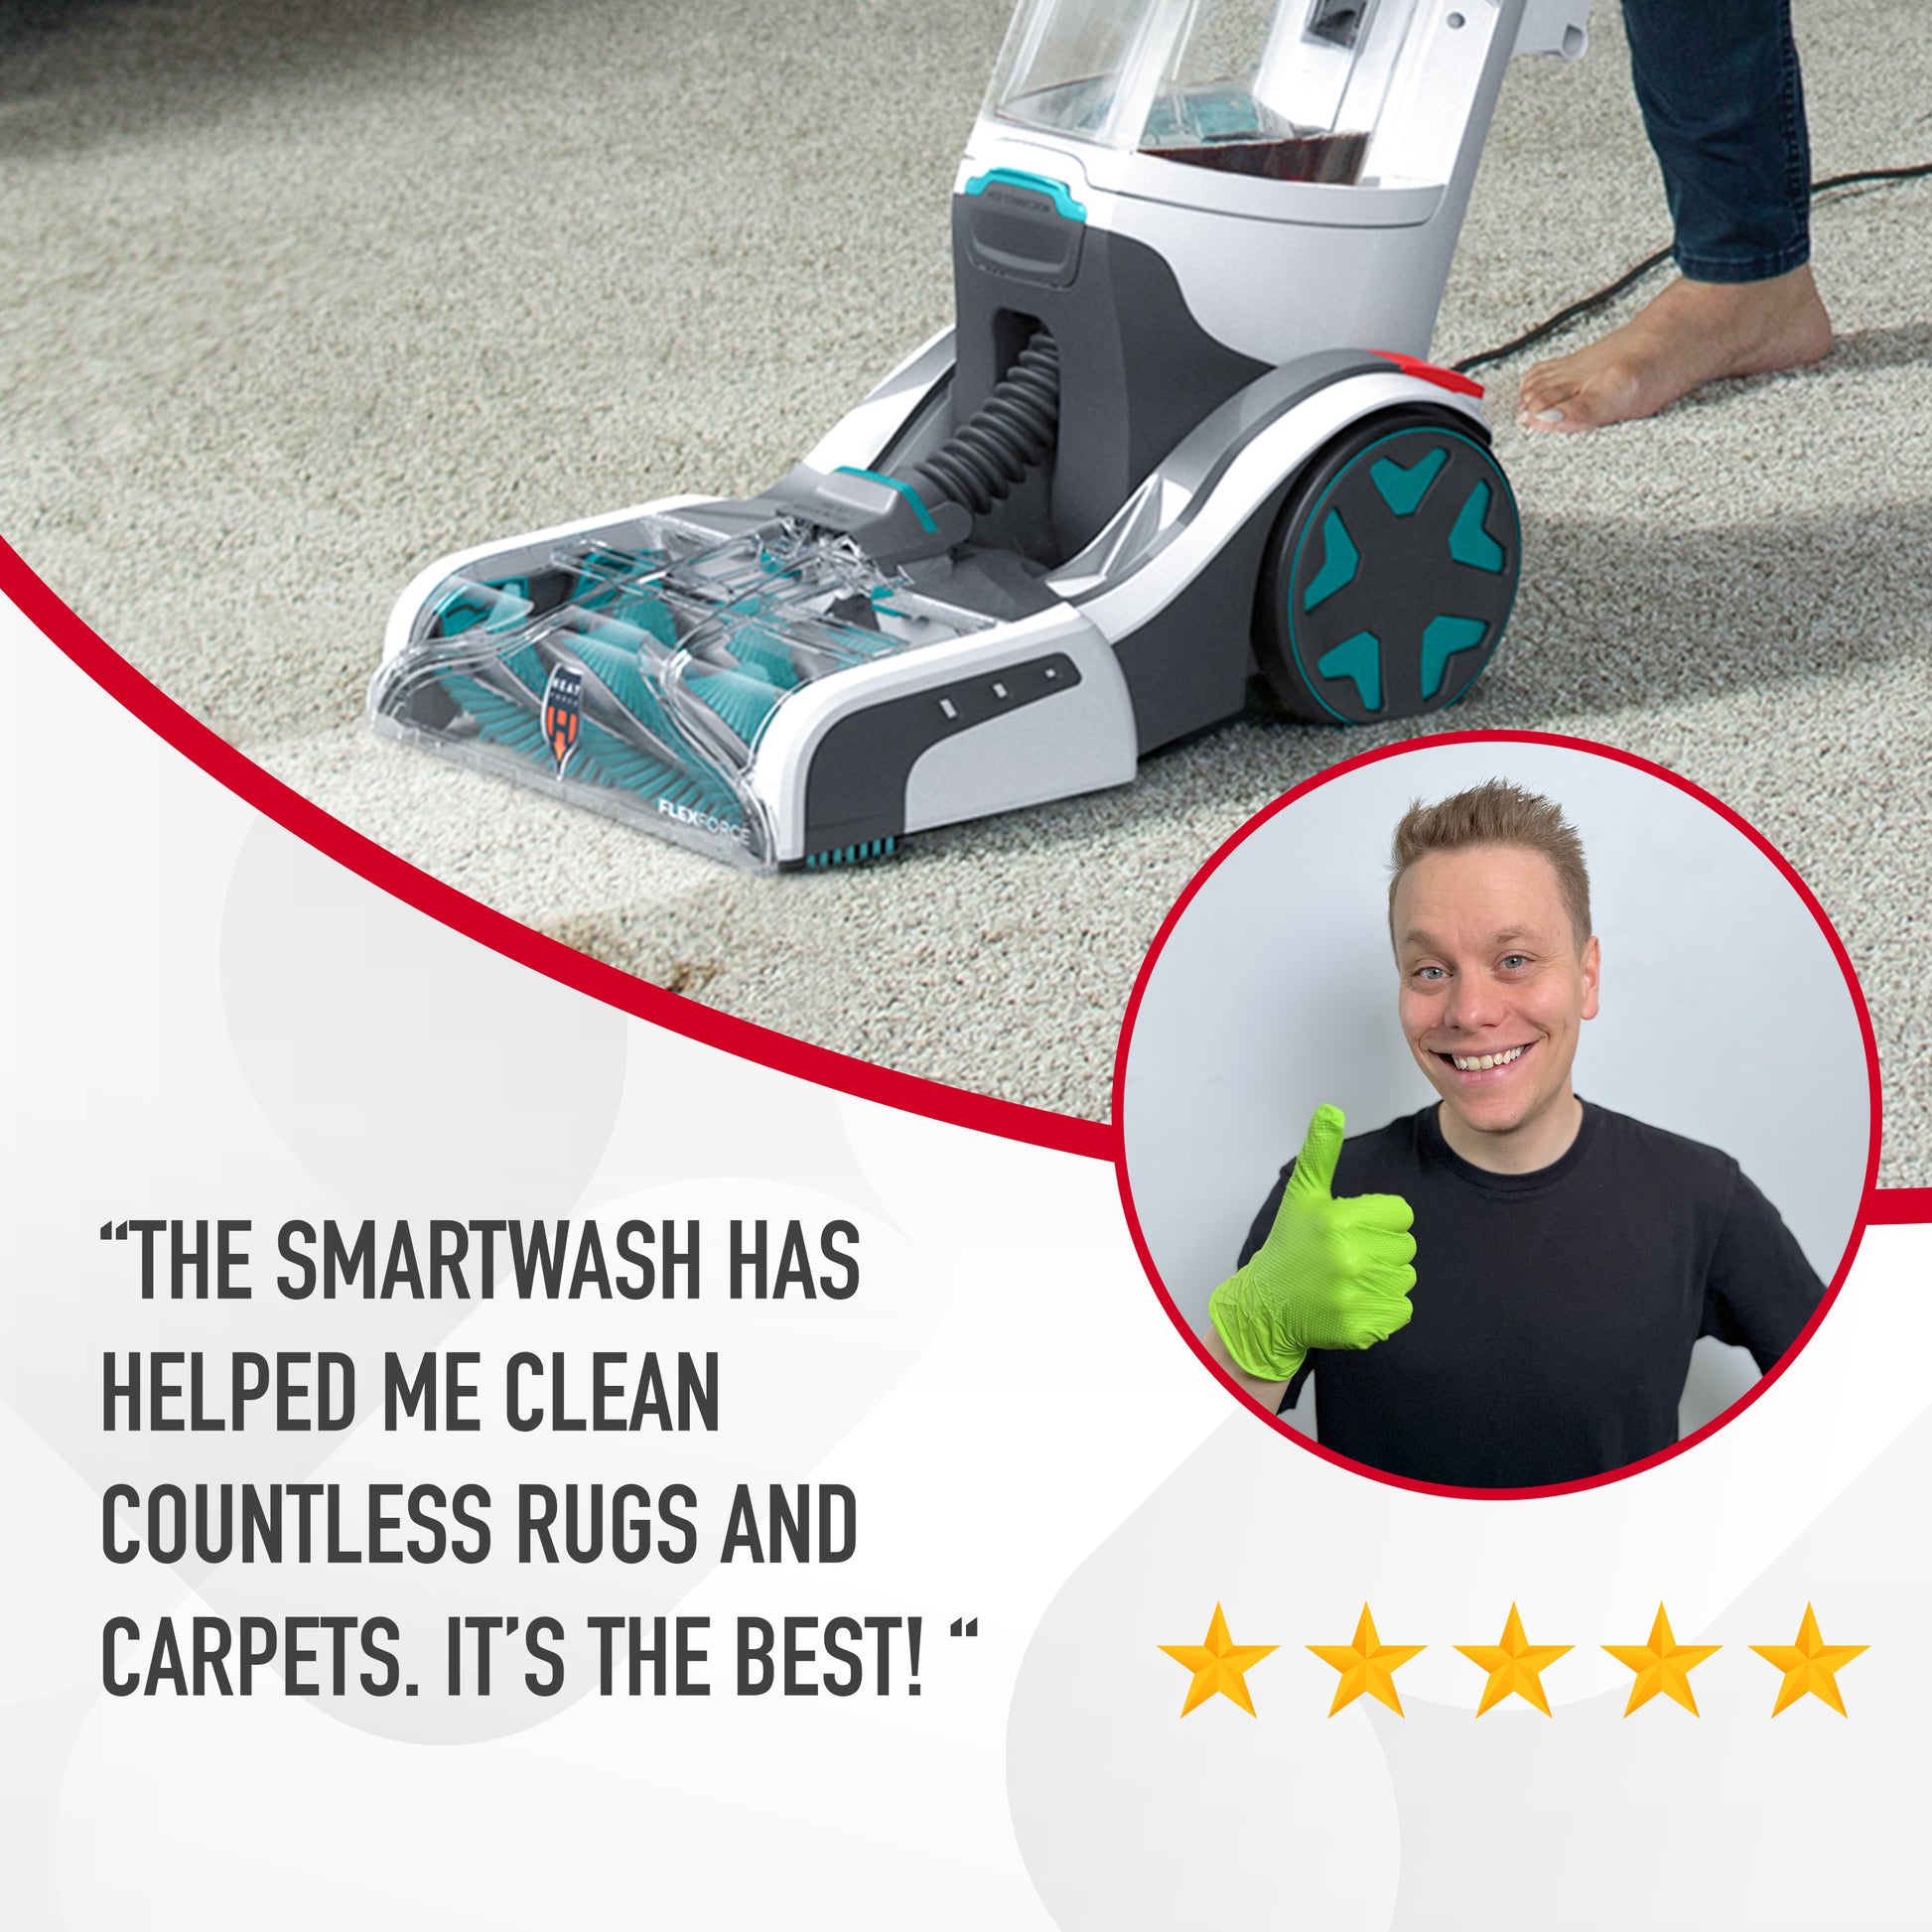 Hoover carpet cleaner testimonial highlighting its effectiveness stating "The smartwash has helped me clean countless rugs and carpets.  It's the best!" 